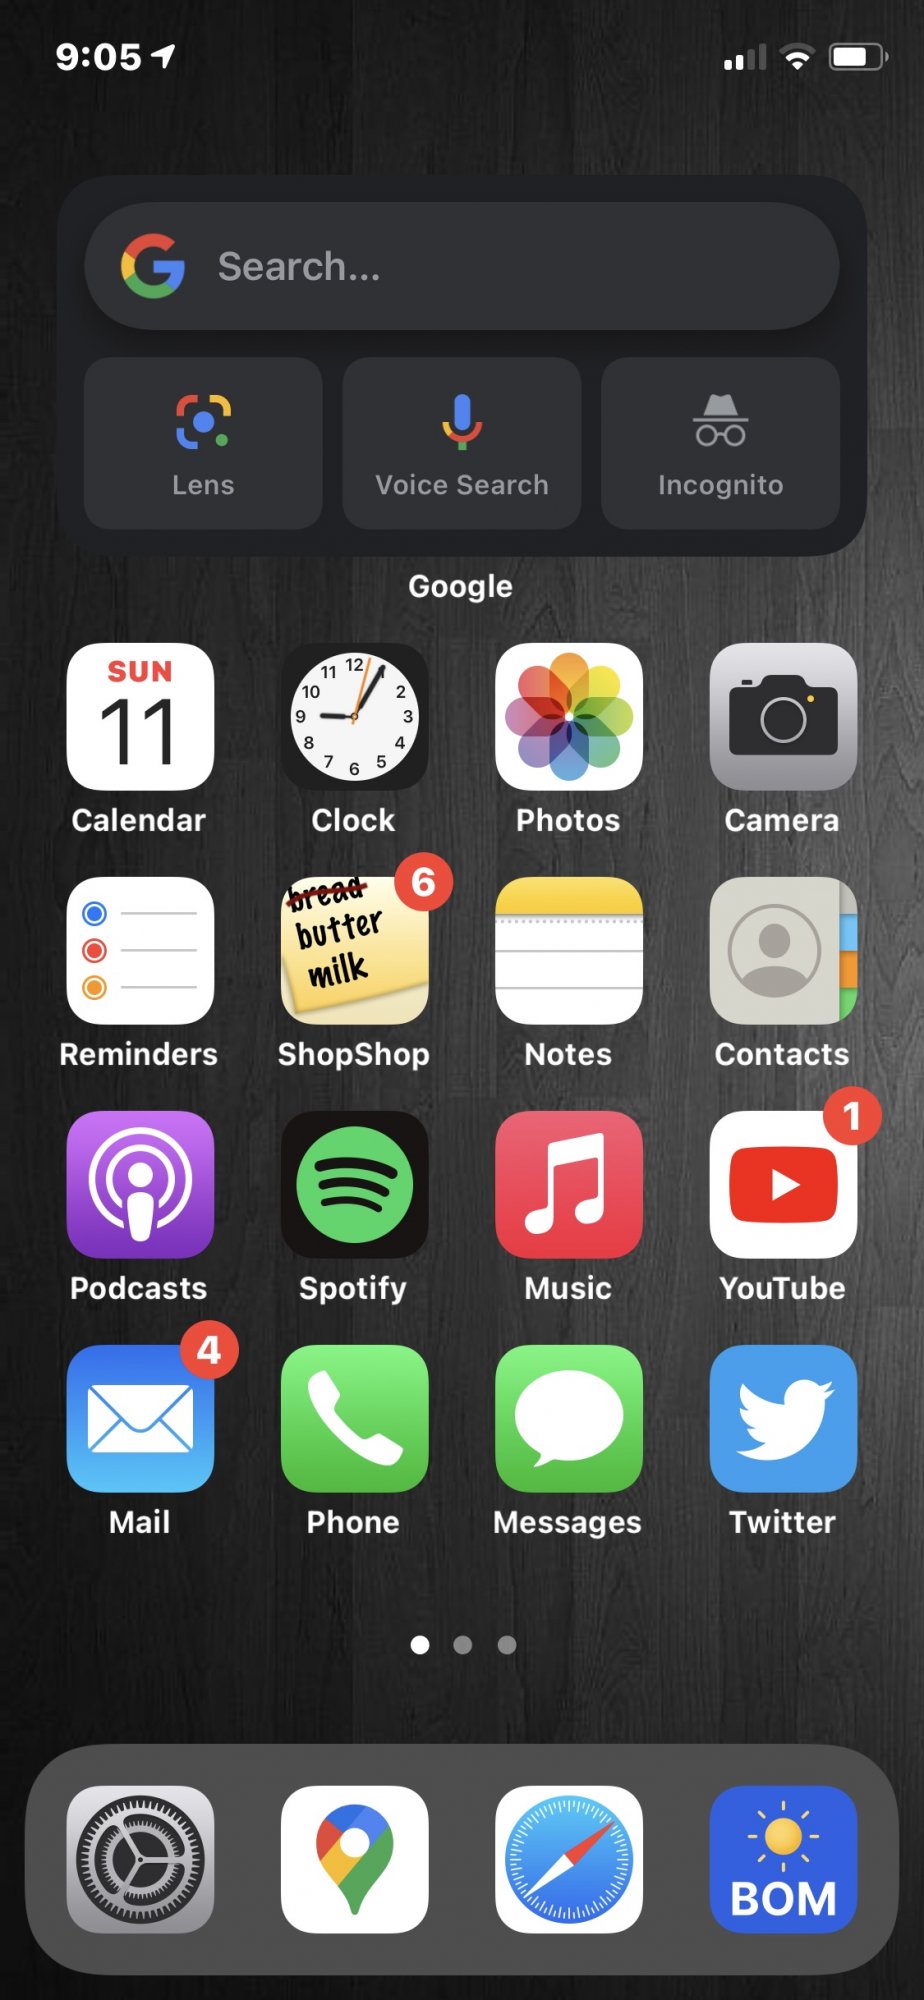 Post your iOS 14 home screen layout | Page 47 | MacRumors Forums